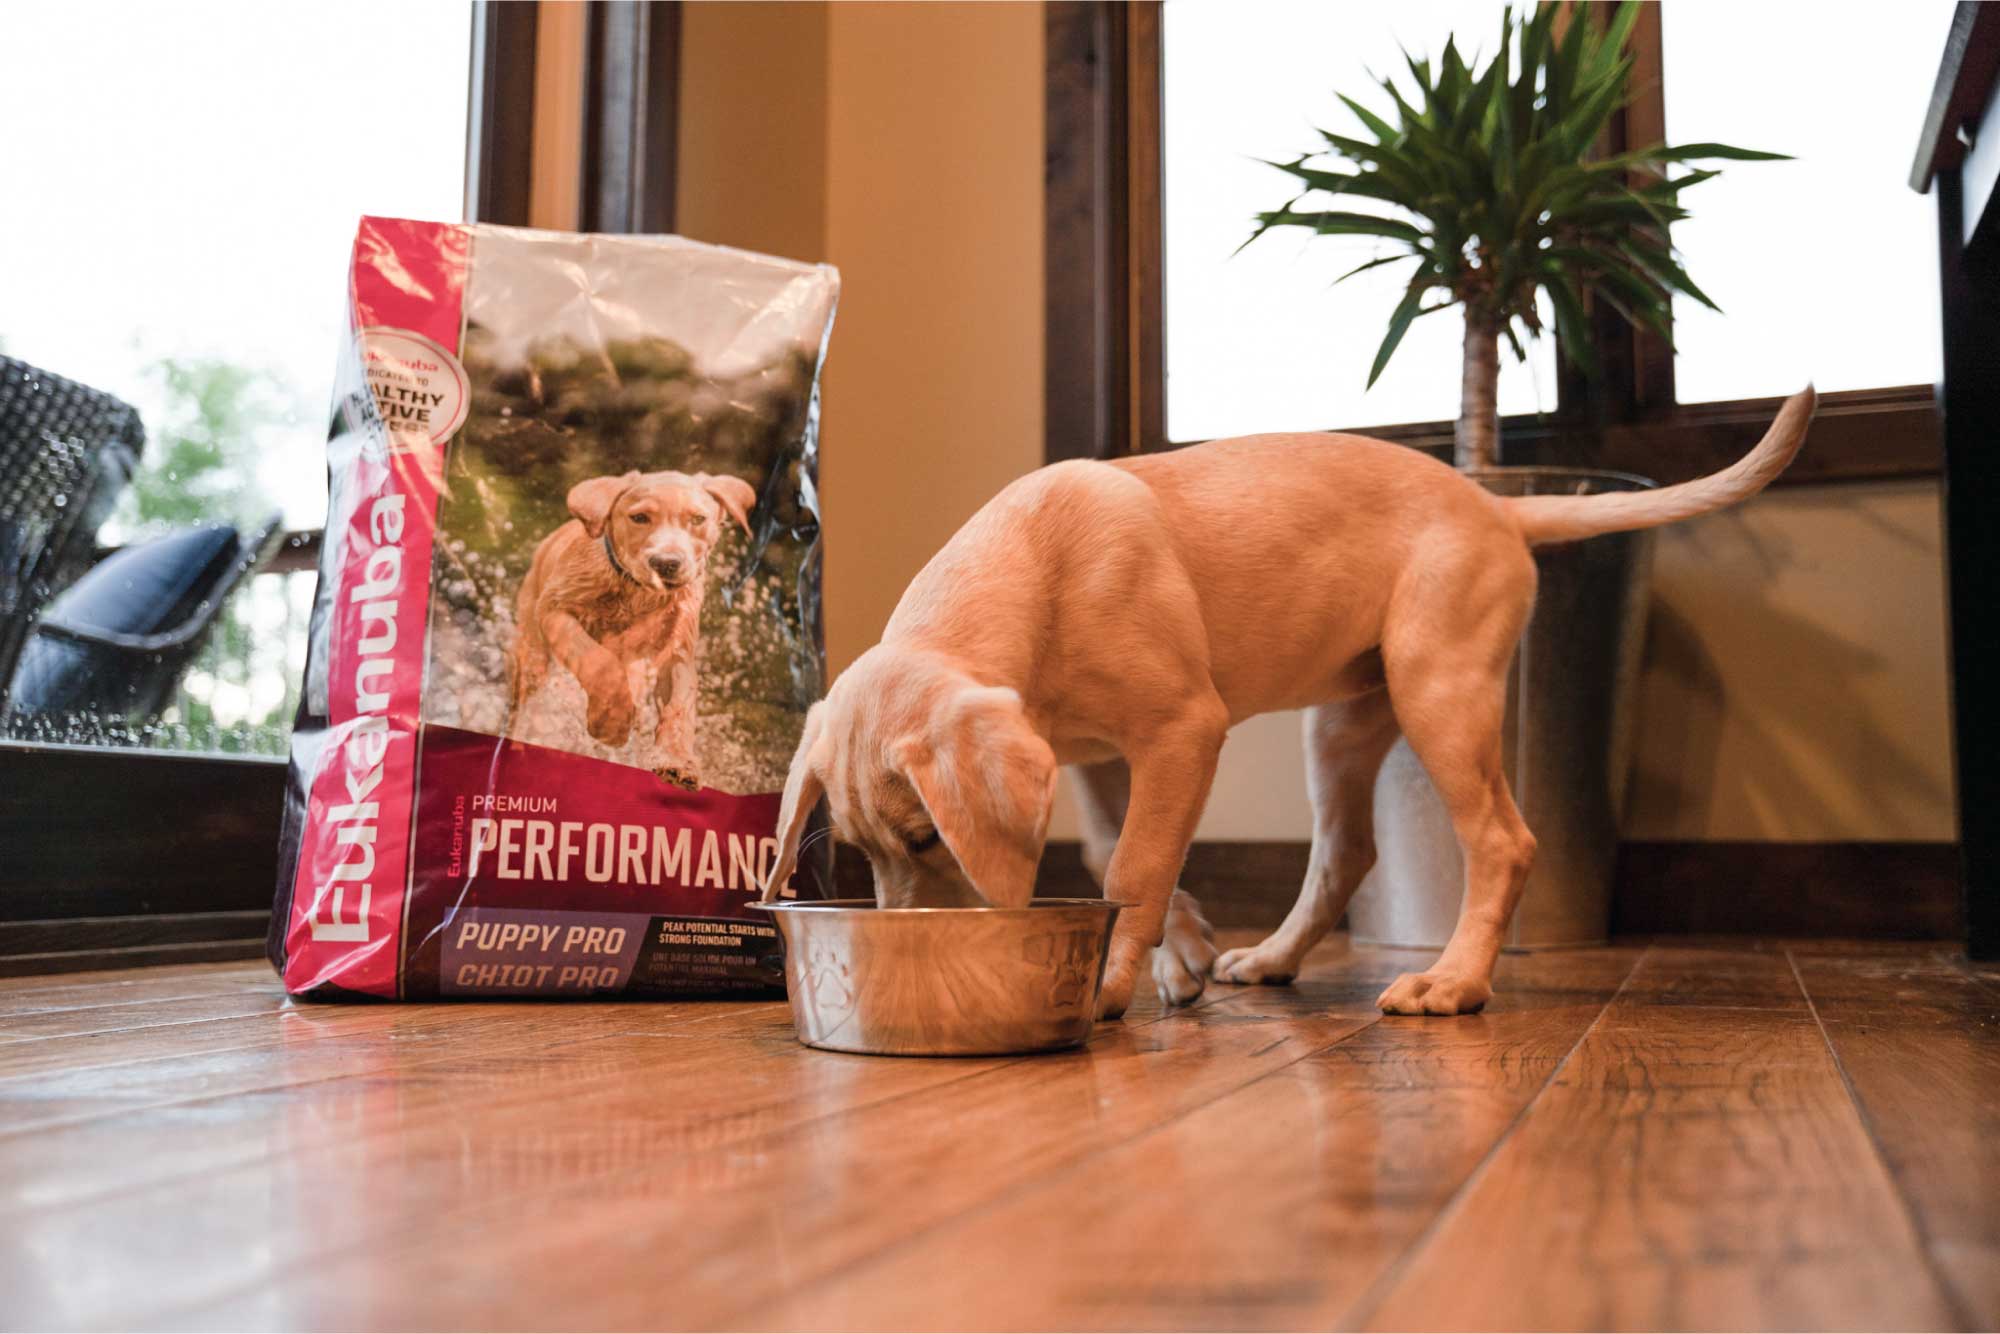 is it ok for a puppy to eat senior dog food